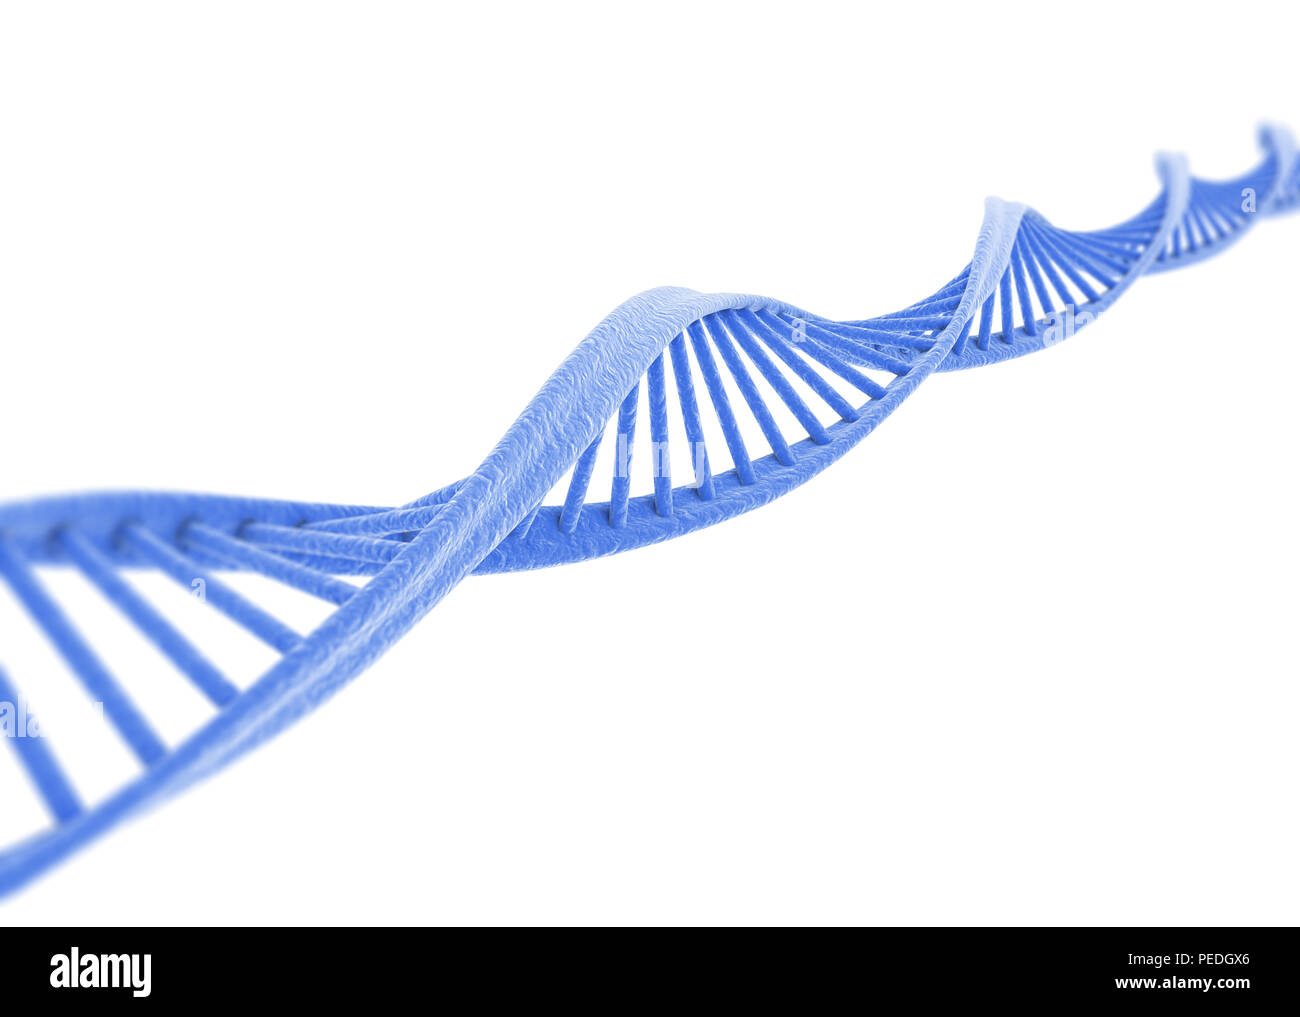 Blue dna model isolated on white background Stock Photo